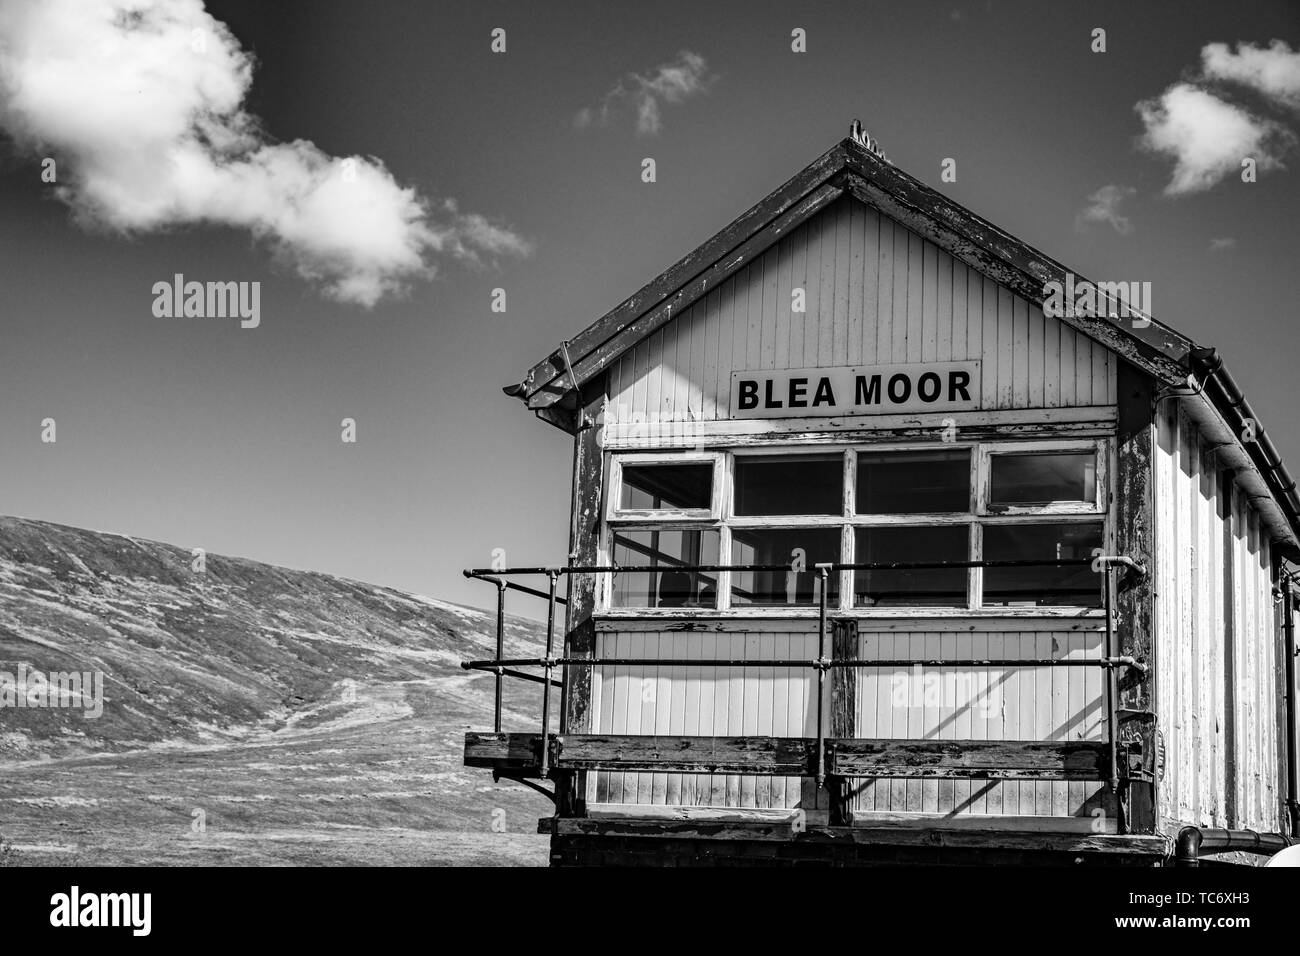 Blea Moor signal box near Ribblehead in The Yorkshire Dales National Park. England UK Stock Photo